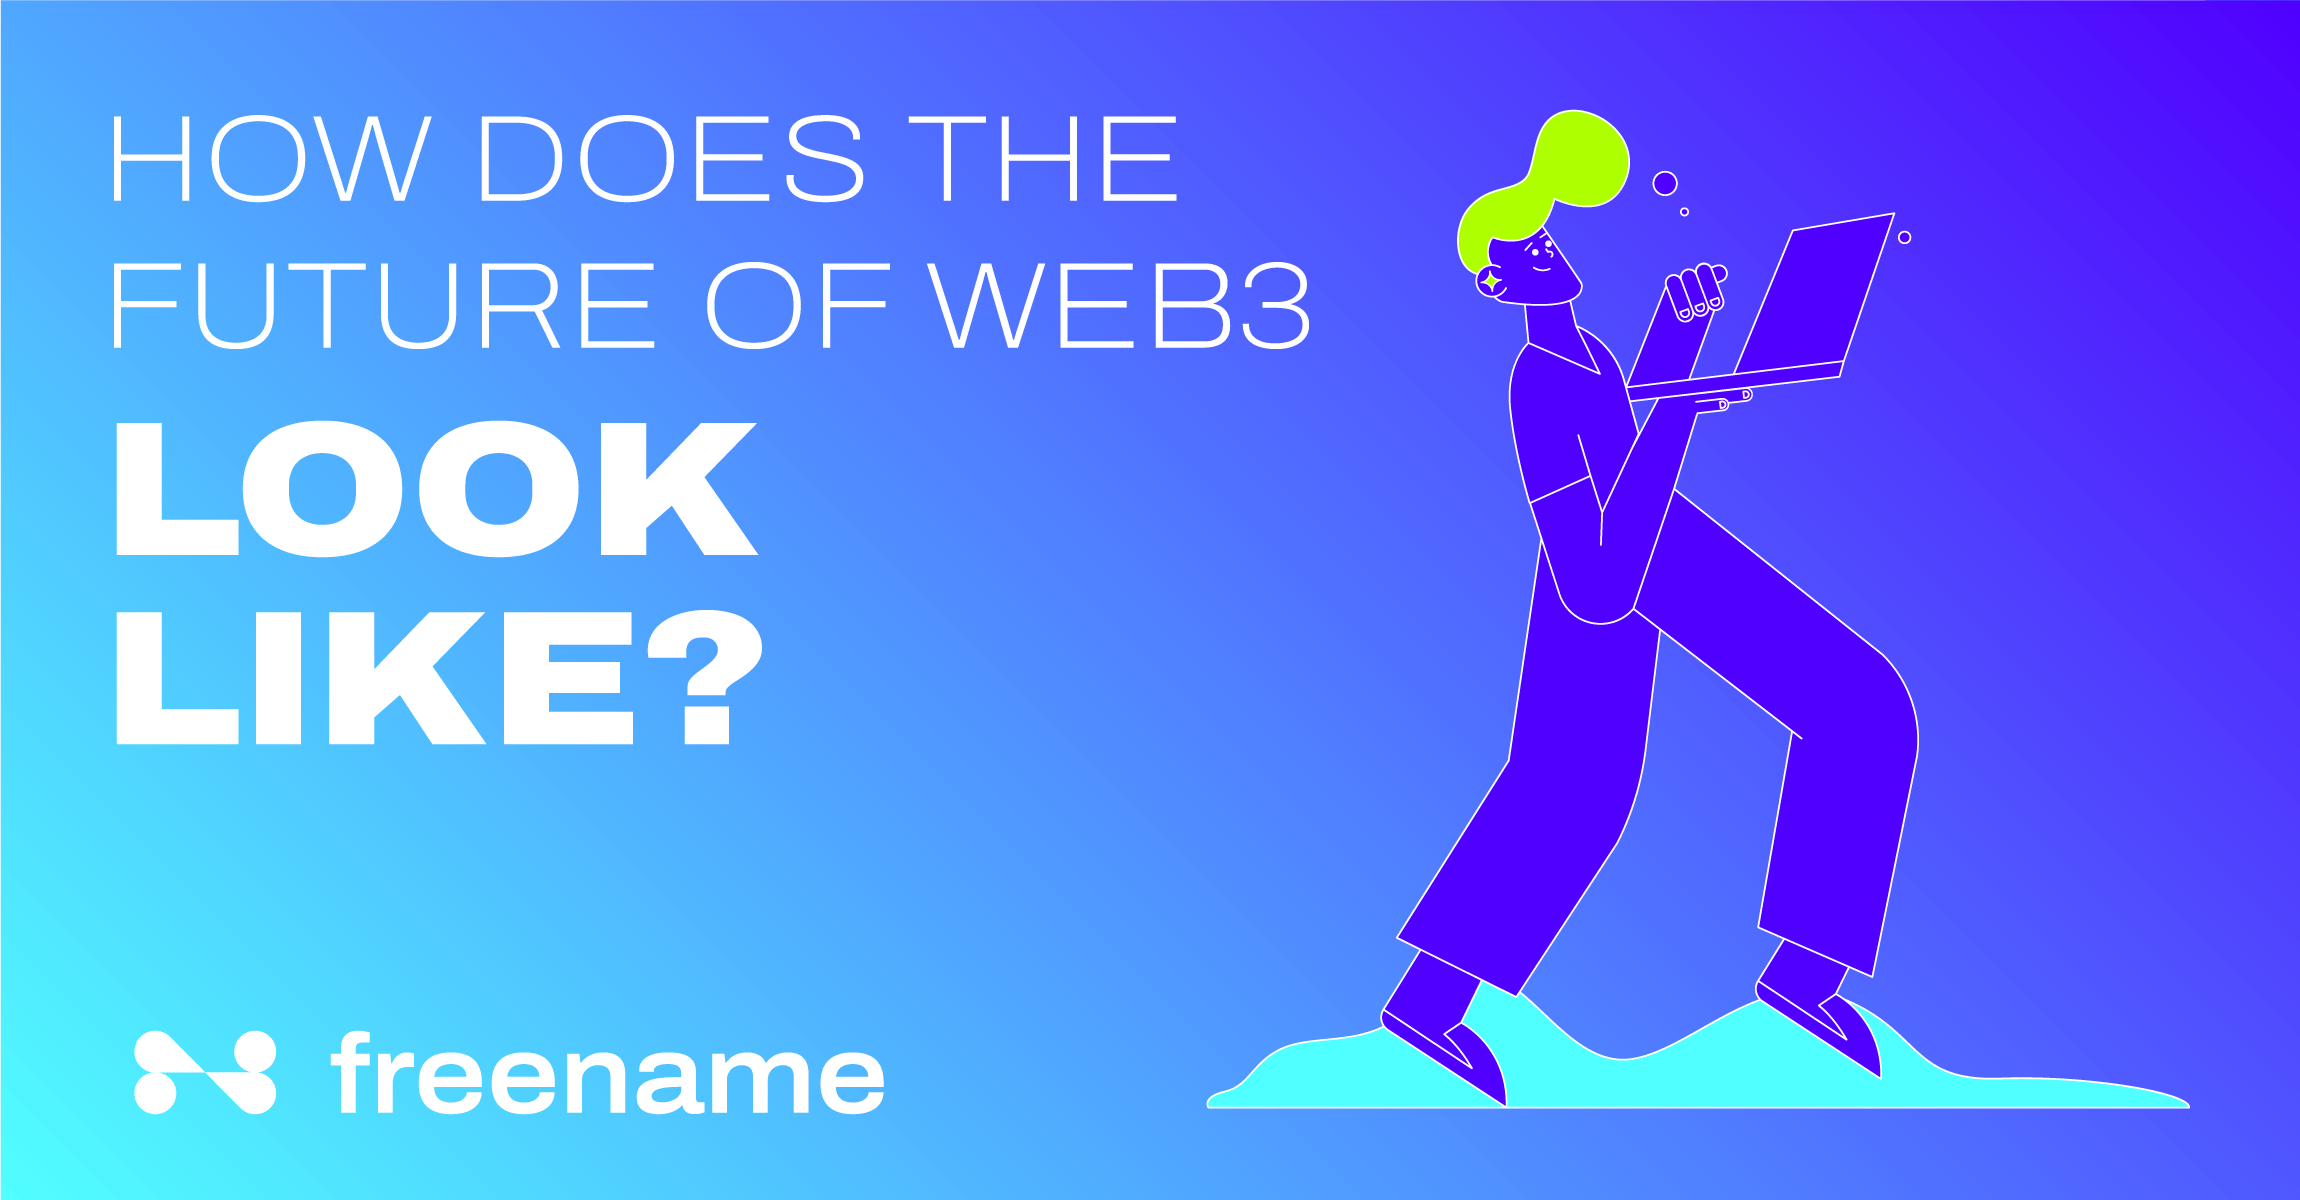 How does the future of web3 look like?